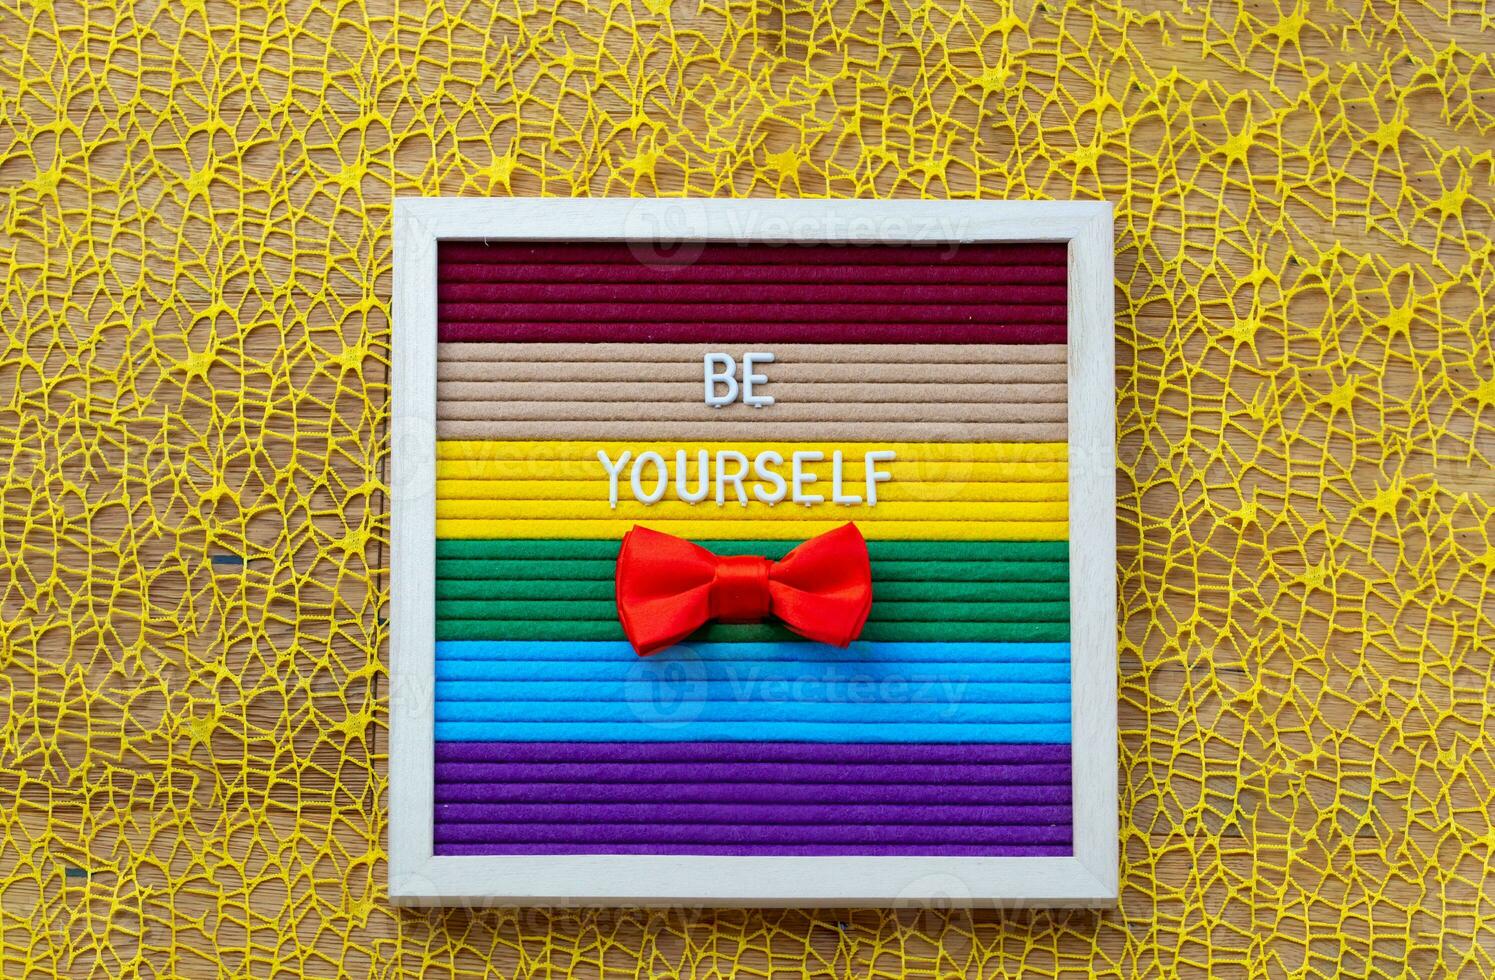 a red bow tie sits on a rainbow striped background with words Be yourself photo